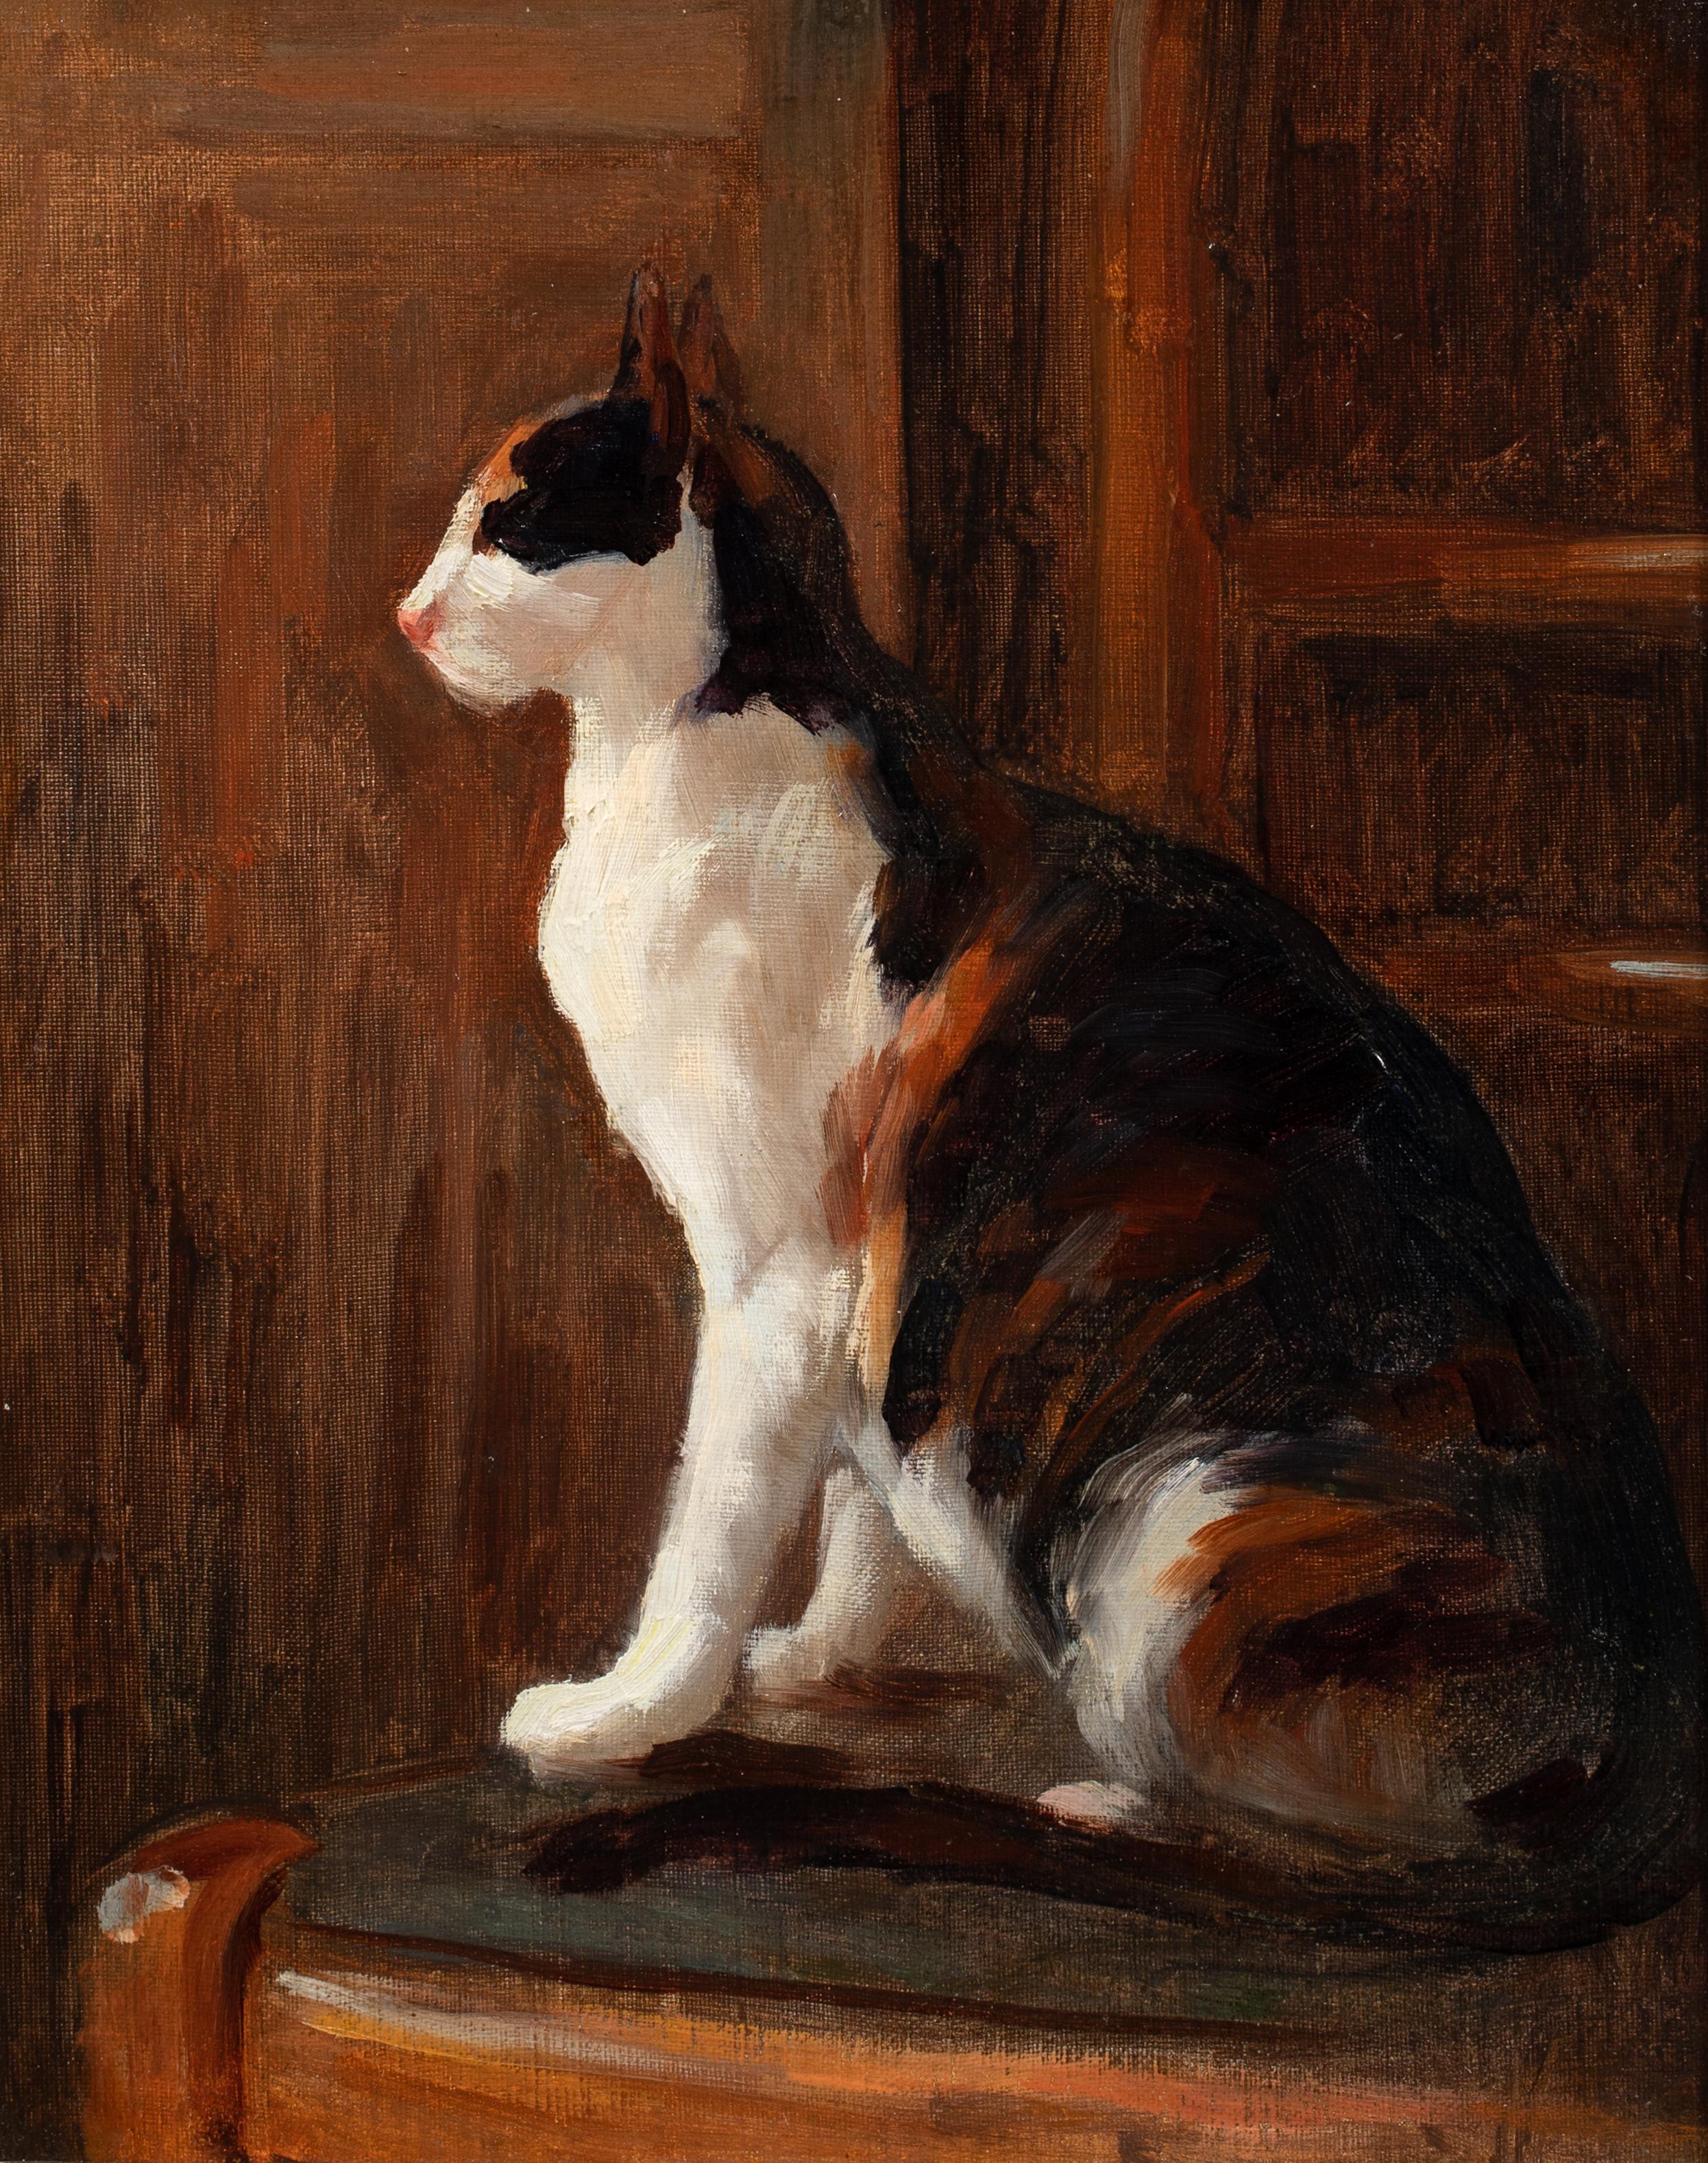 Study Of A Cat, 19th century

attributed to Théophile Alexandre STEINLEN (1859-1923)

Large 19th century French study of a cat, oil on board attributed to Theophile Steinlen. Excellent quality and condition study with beautful treatment of light.